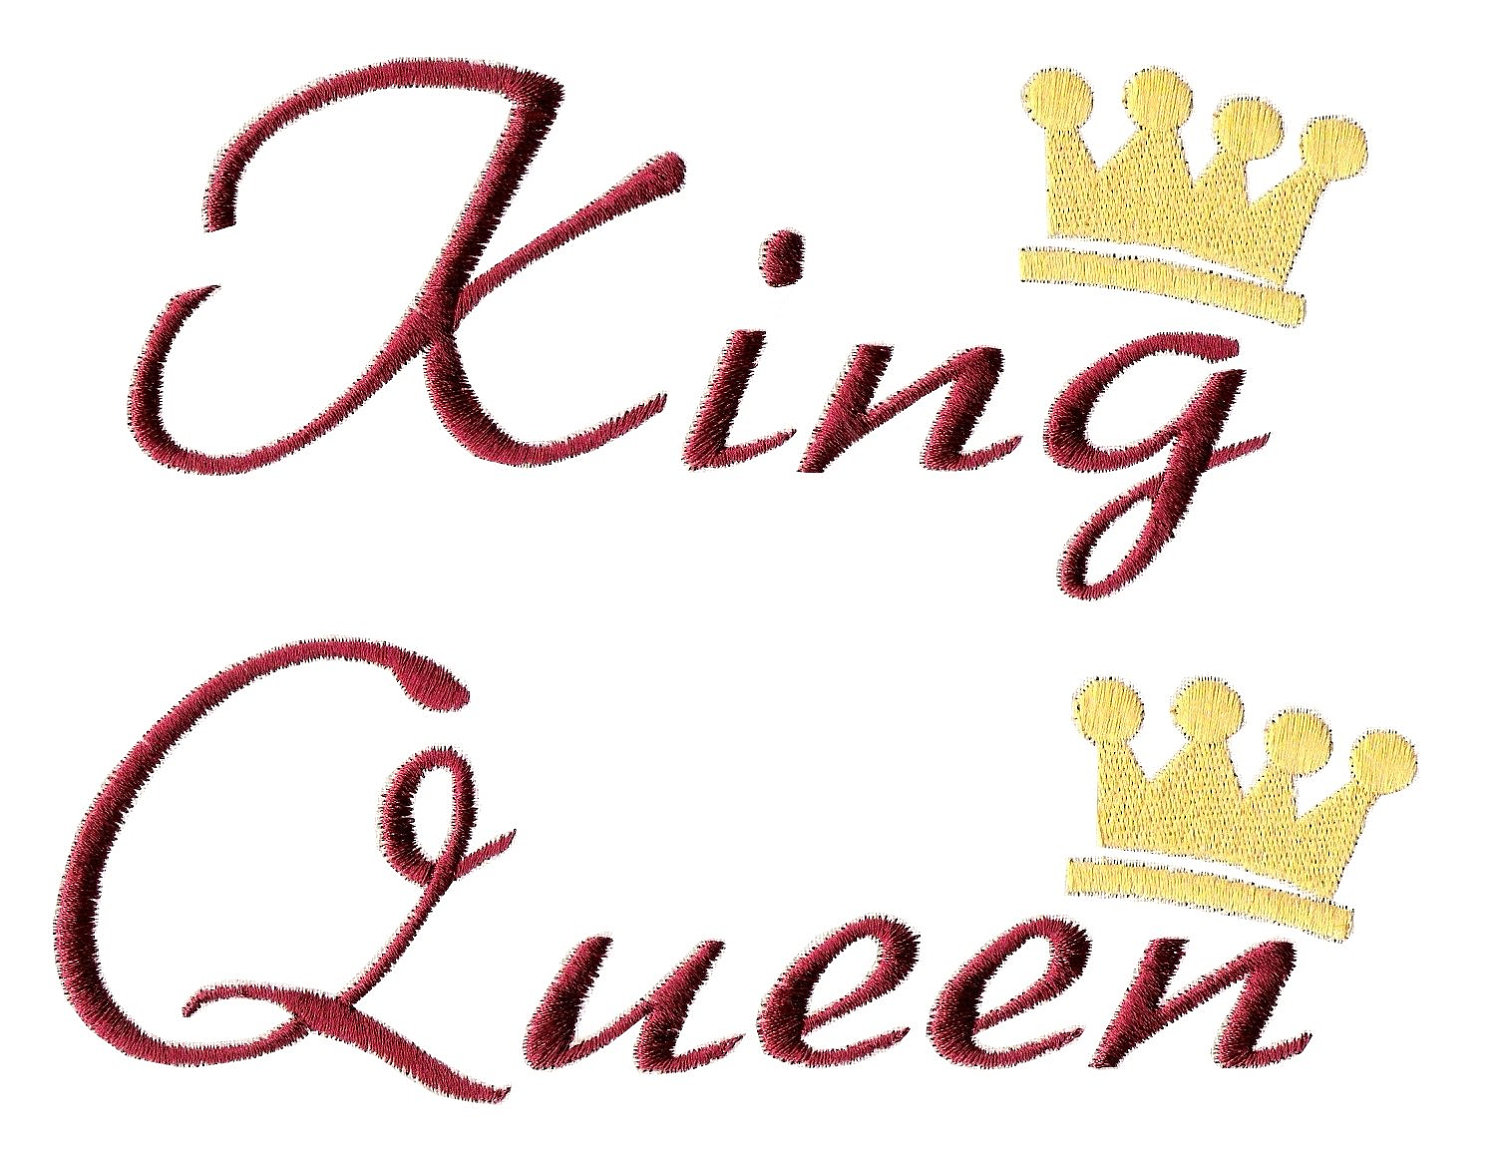 king clipart prom queen